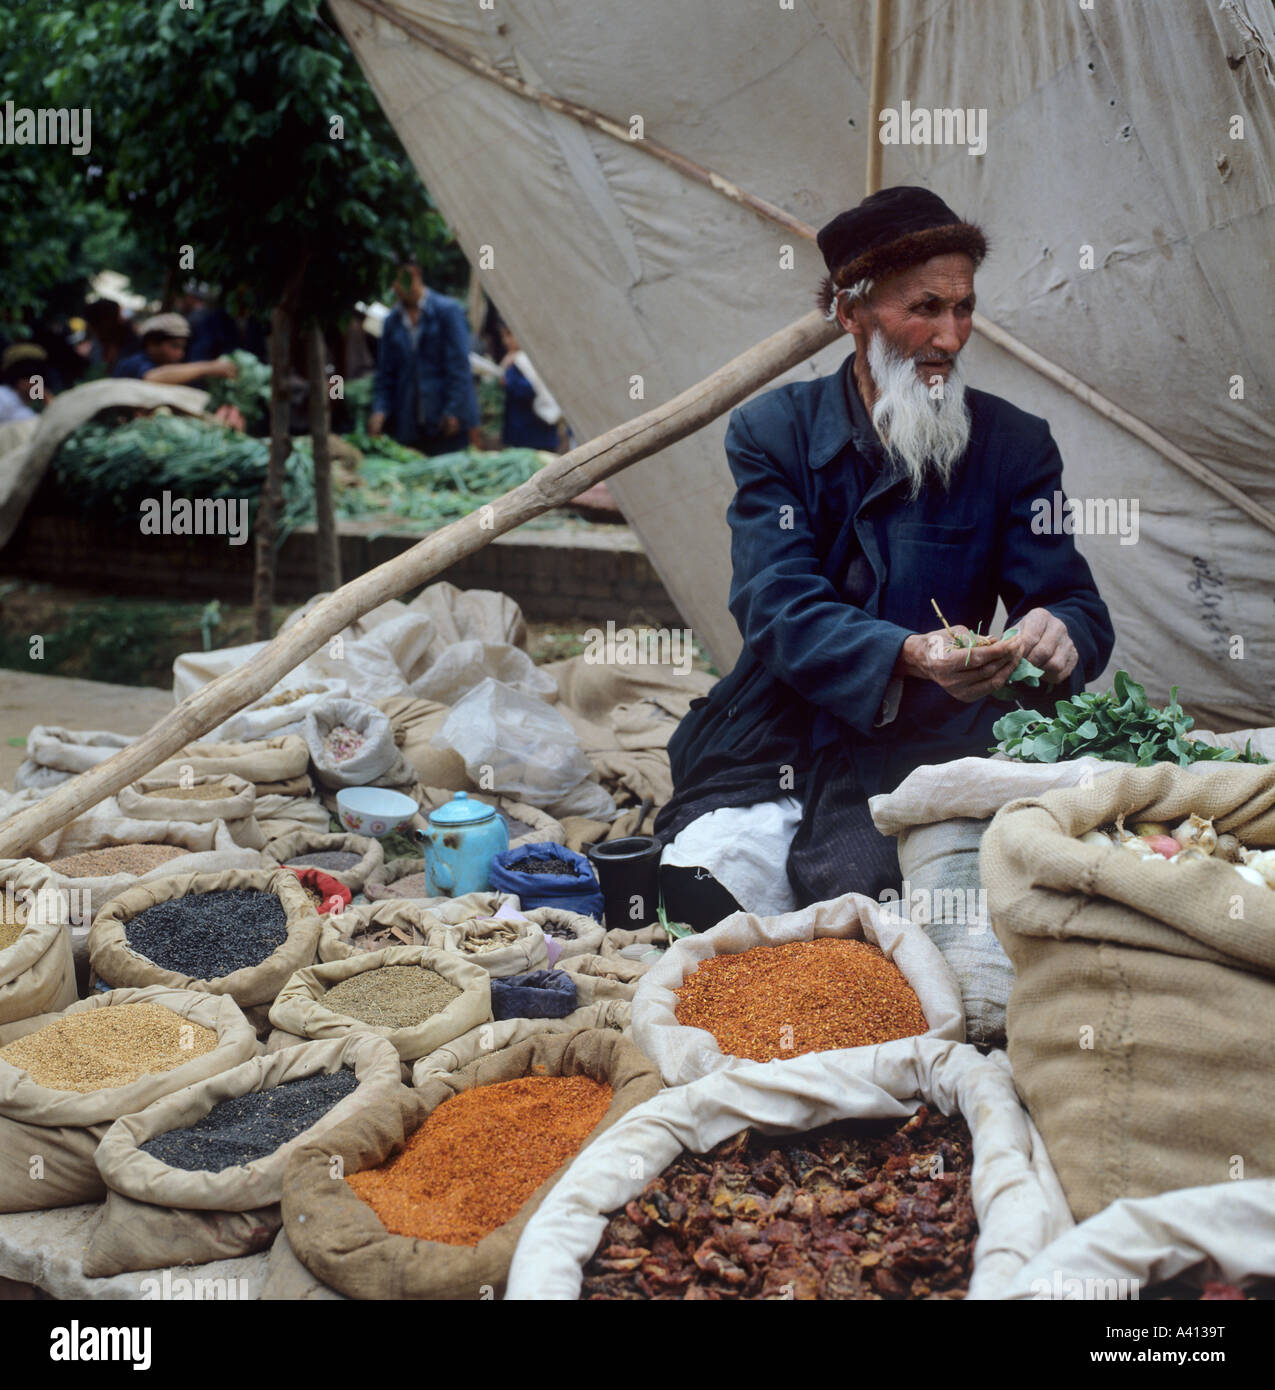 Man selling spices in Kashgar market, Silk Road, China Stock Photo